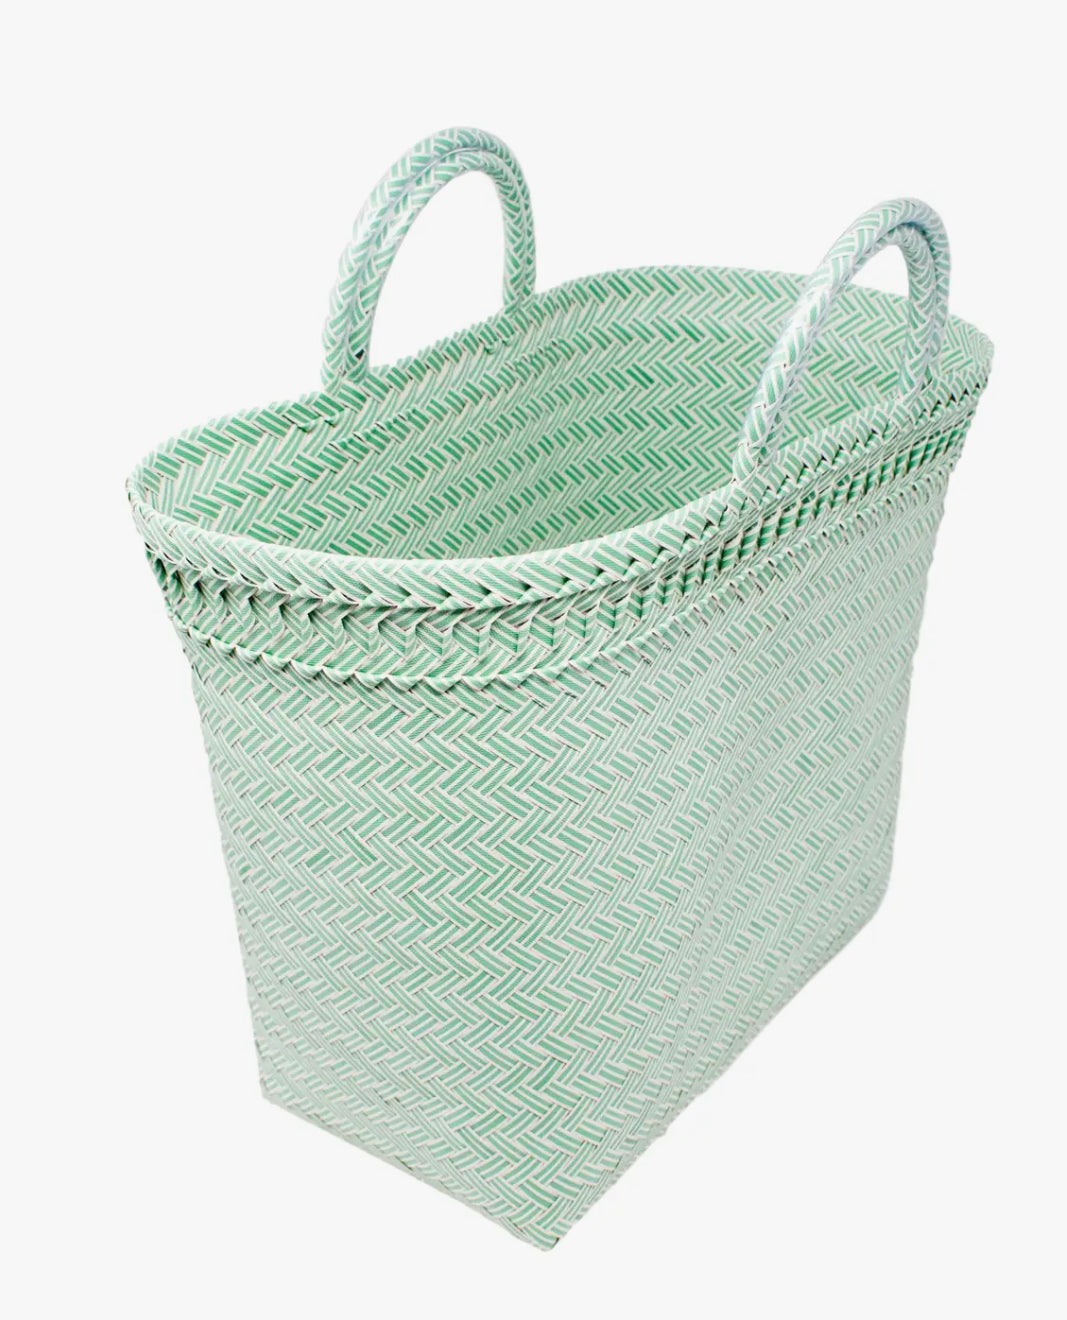 Maisy Tote in Mint